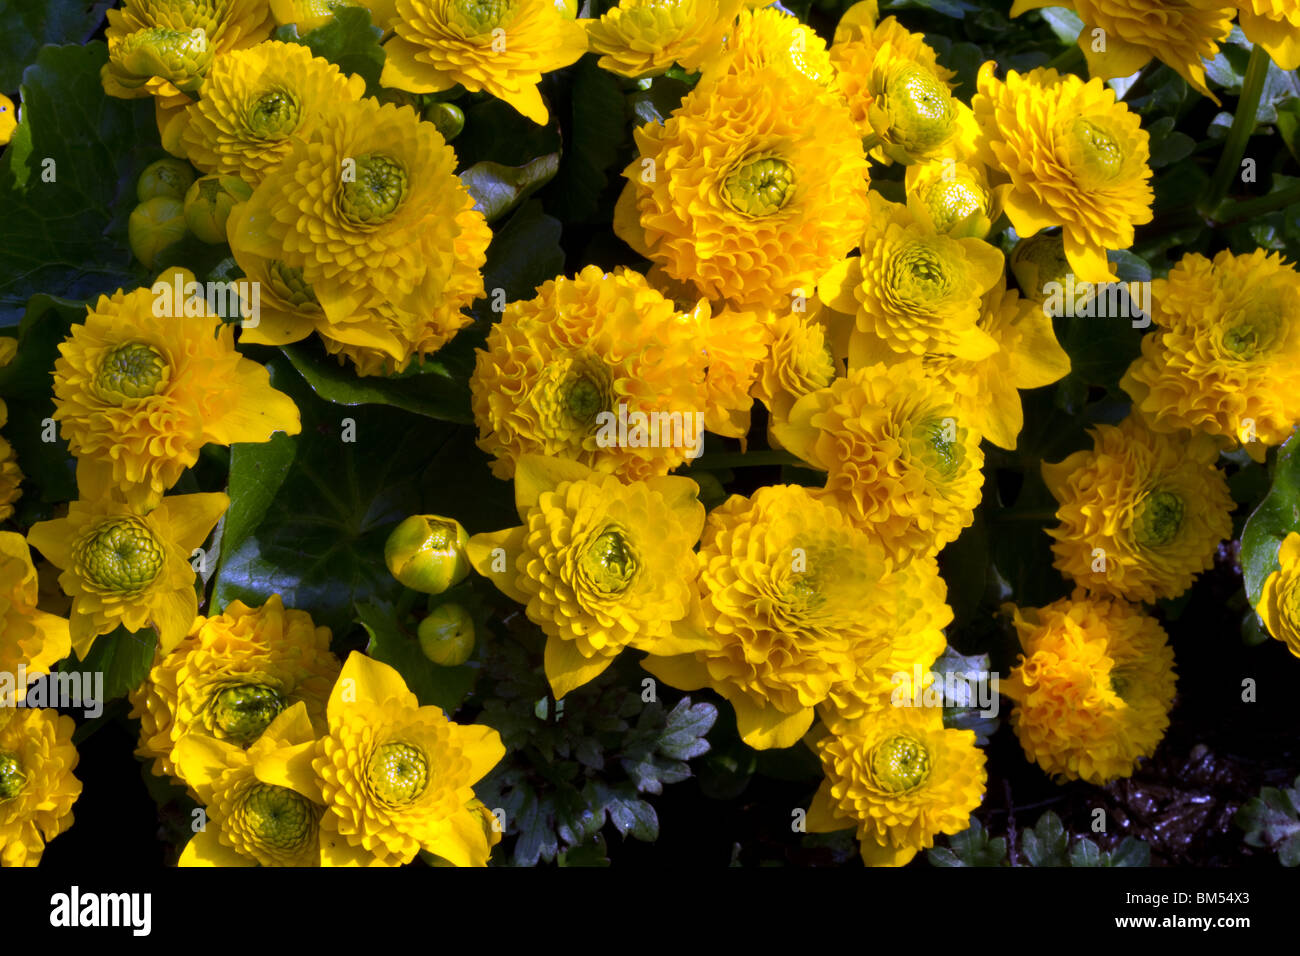 Ranunculaceae caltha palustris florentino Yellow Buttercup bunch of dense group of flowering blooms, Southport, UK Stock Photo